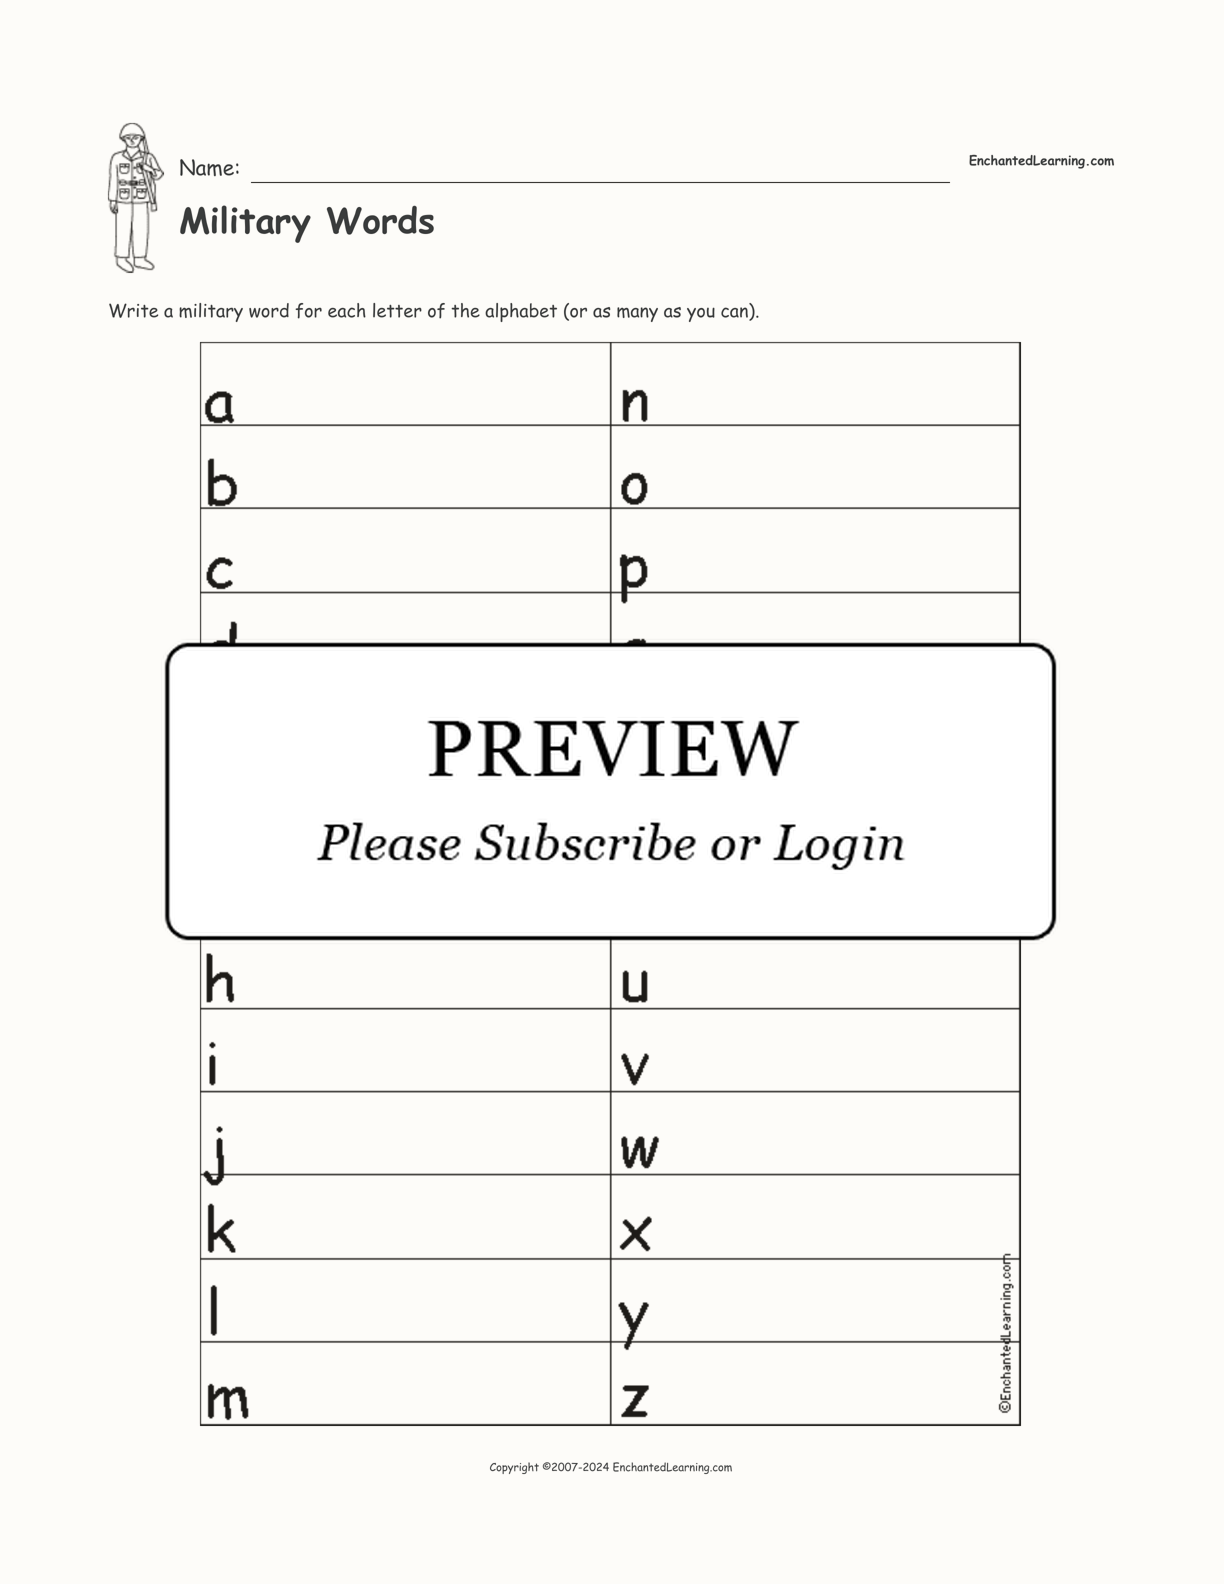 Military Words interactive worksheet page 1